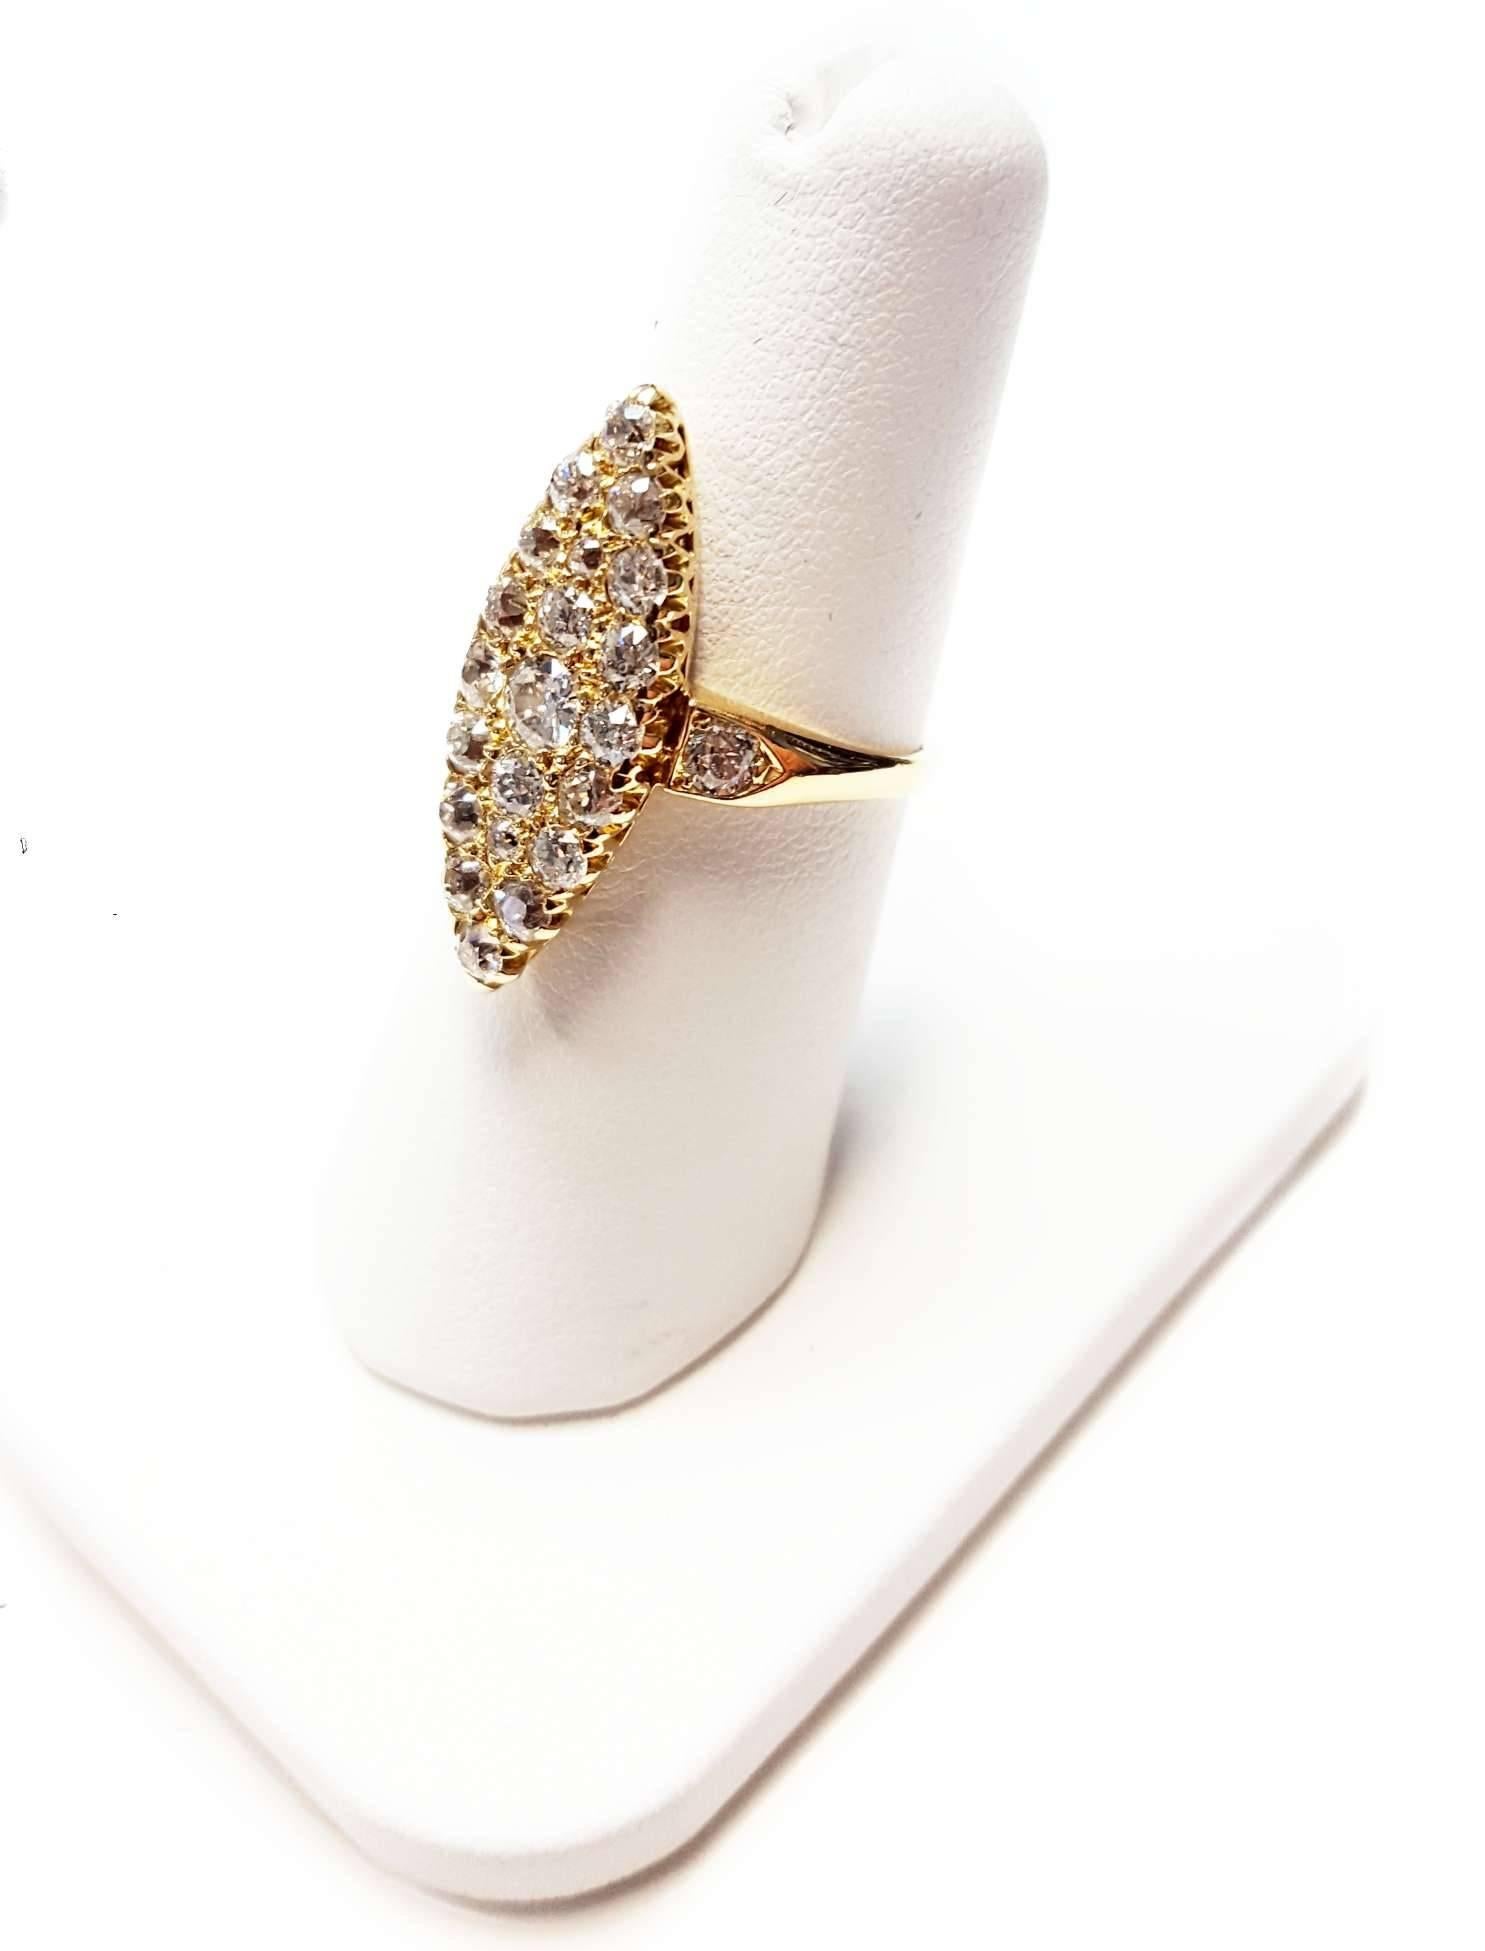 An Early 1900's diamond ring set with 23 Old Mine Cut diamonds that weigh 1.40cttw. The ring measures 1 inch long and 3/8 inches wide. The diamonds are J to K color Vs2 to Si2 clarity. Set in 18 karat yellow gold. 